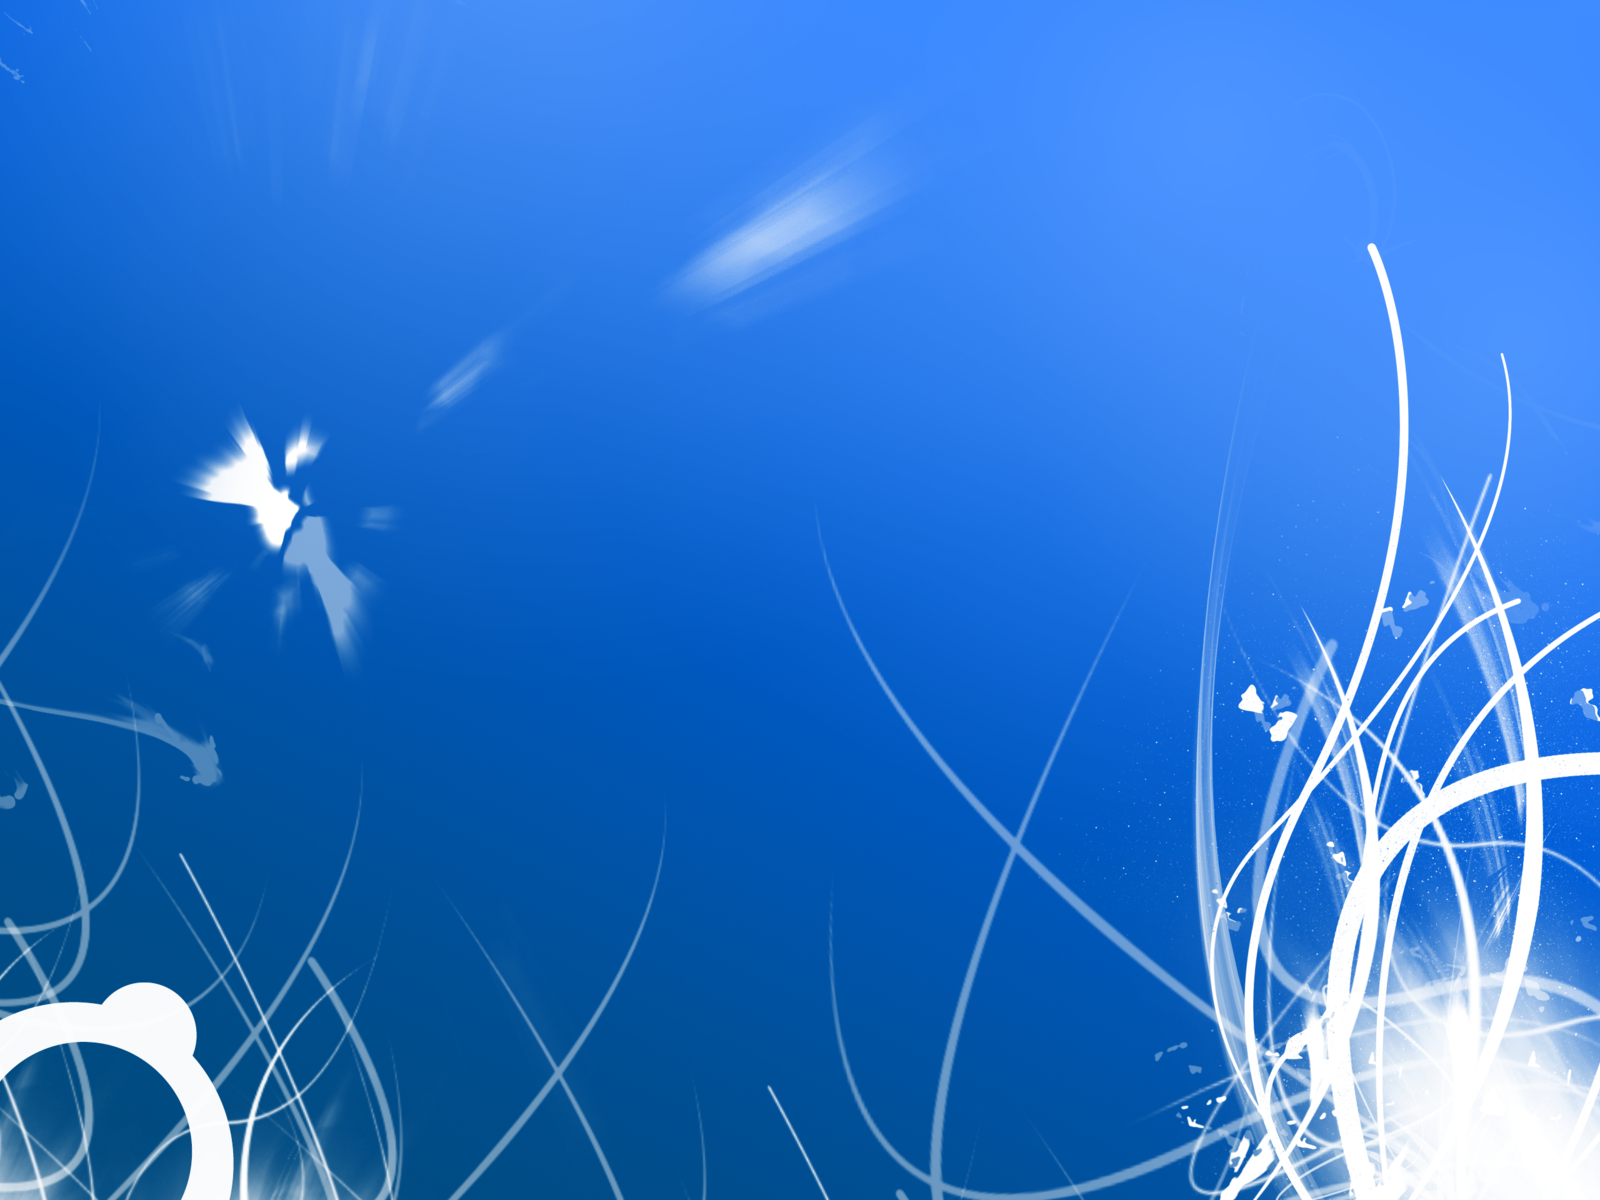 Wallpaper White and Blue by Too-Fast on DeviantArt